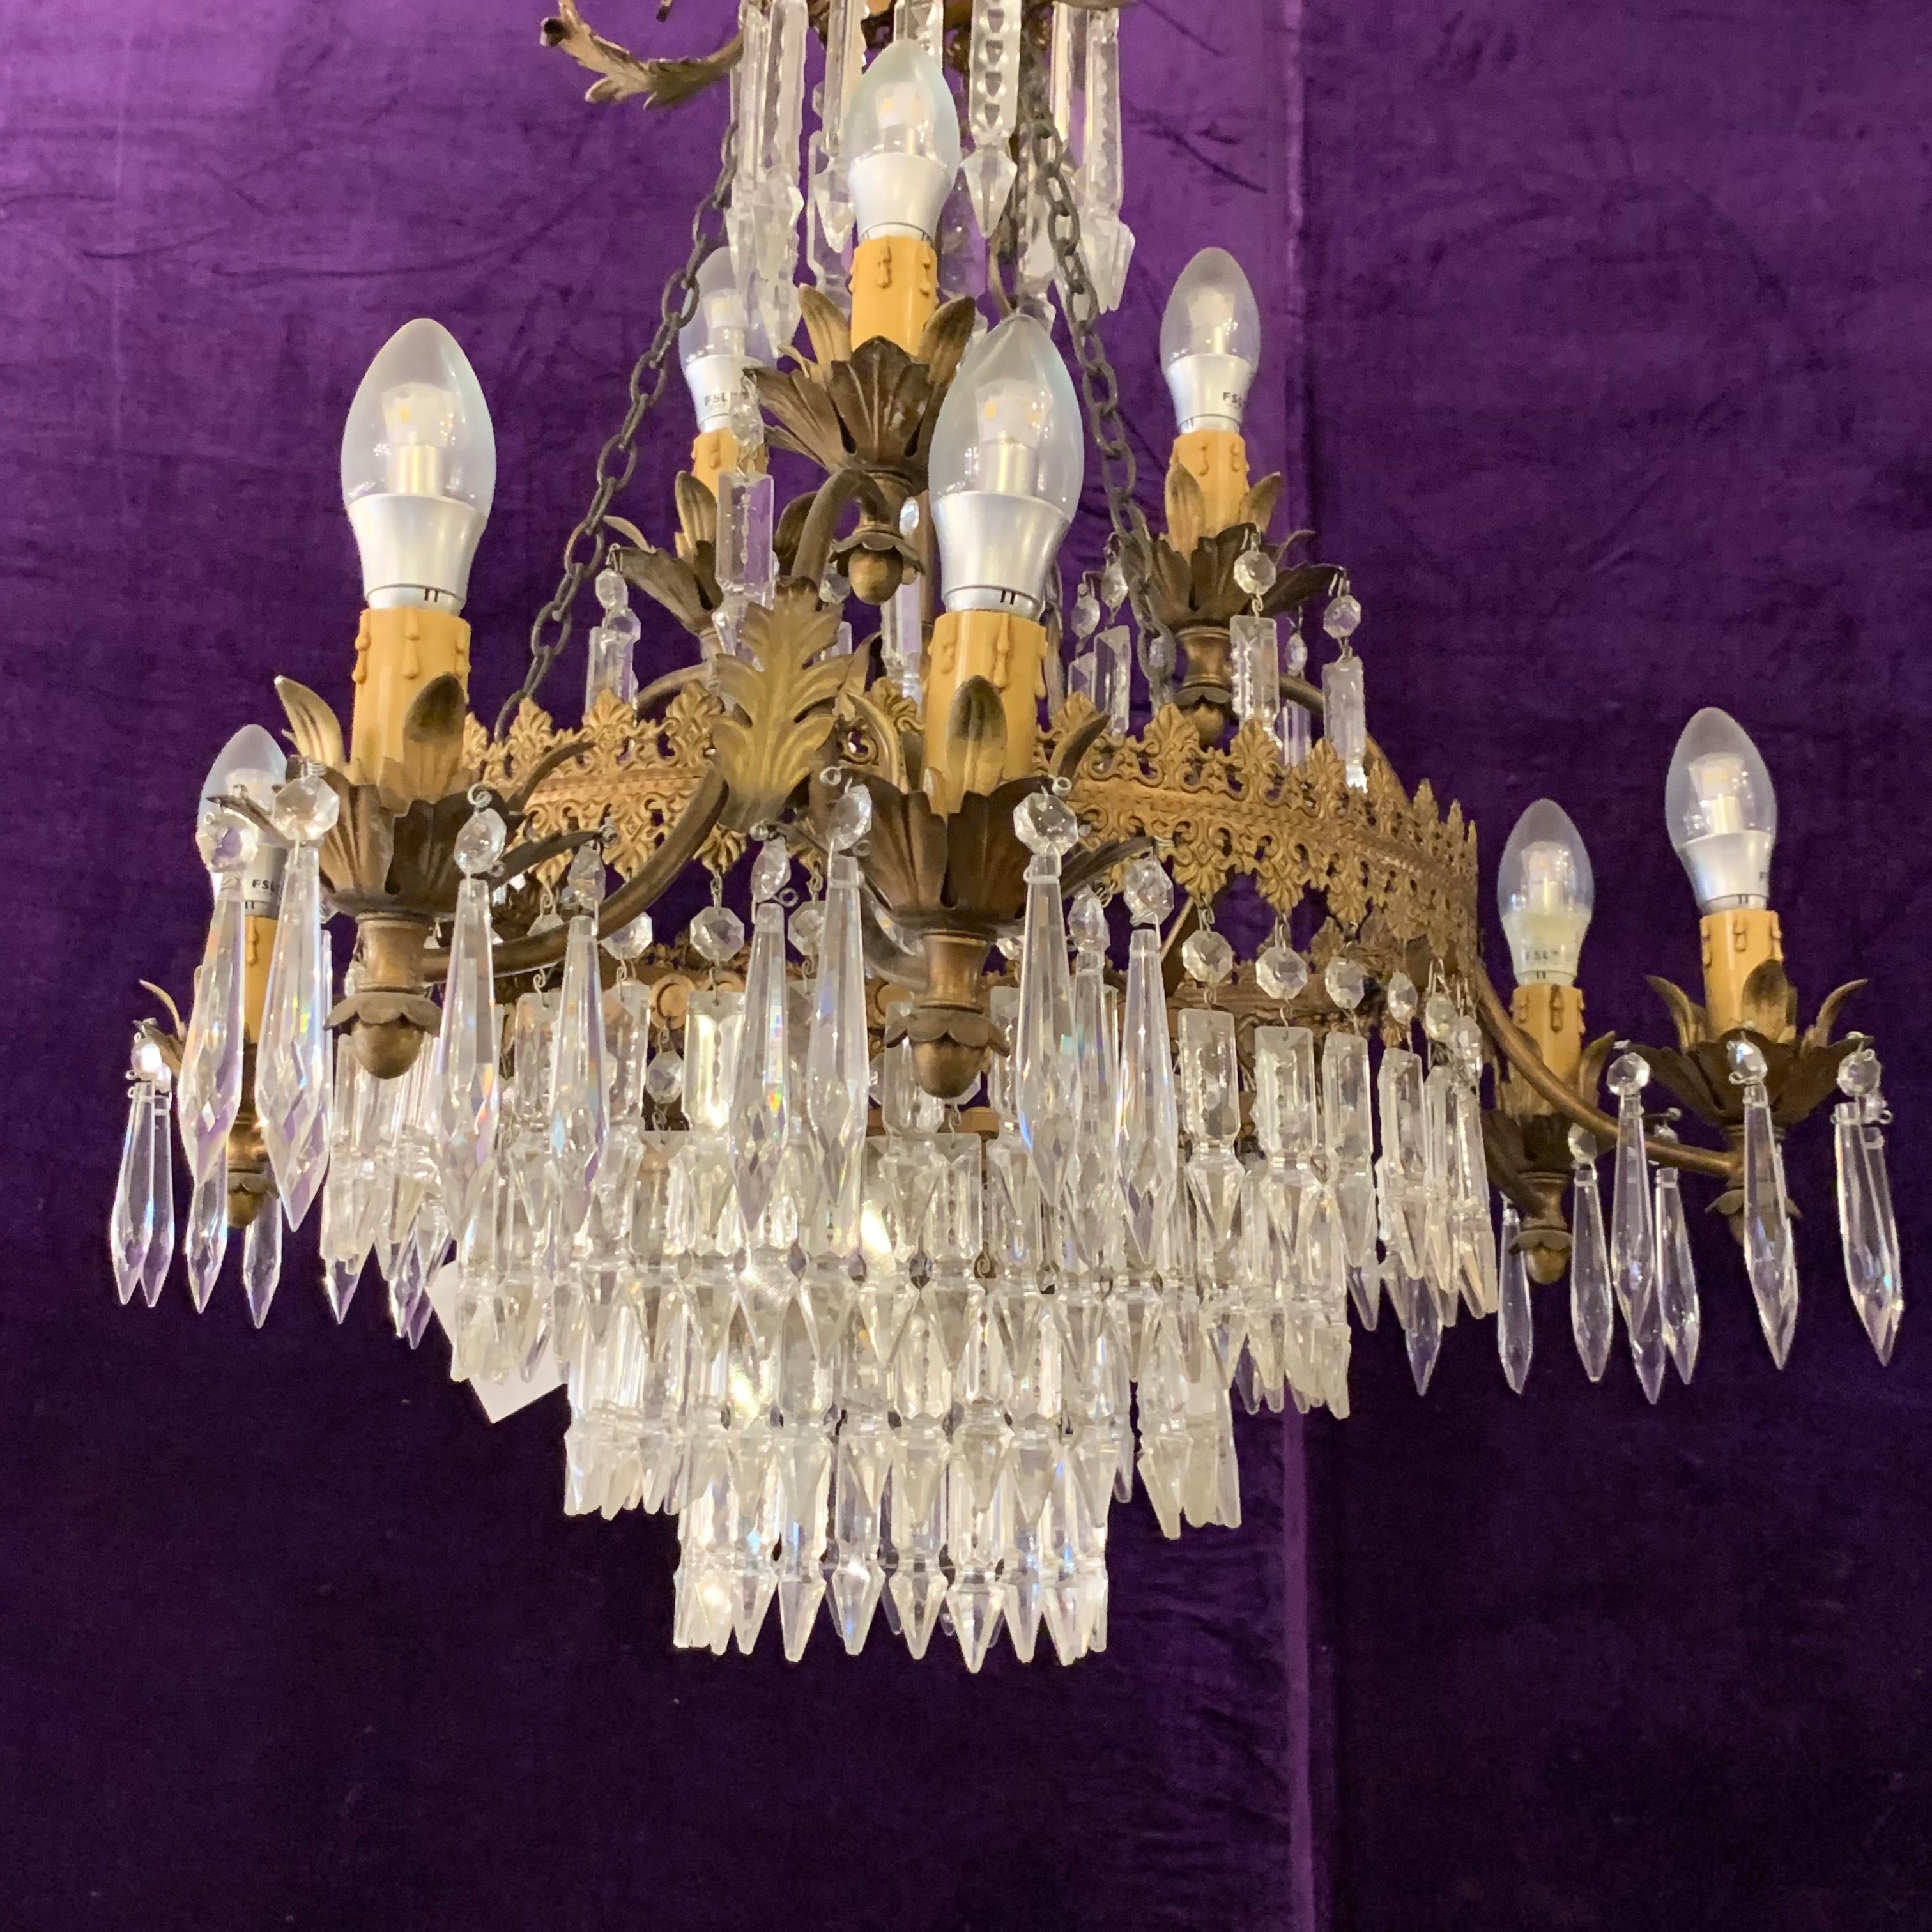 Antique Neoclassical Chandelier with Arrowhead Crystals